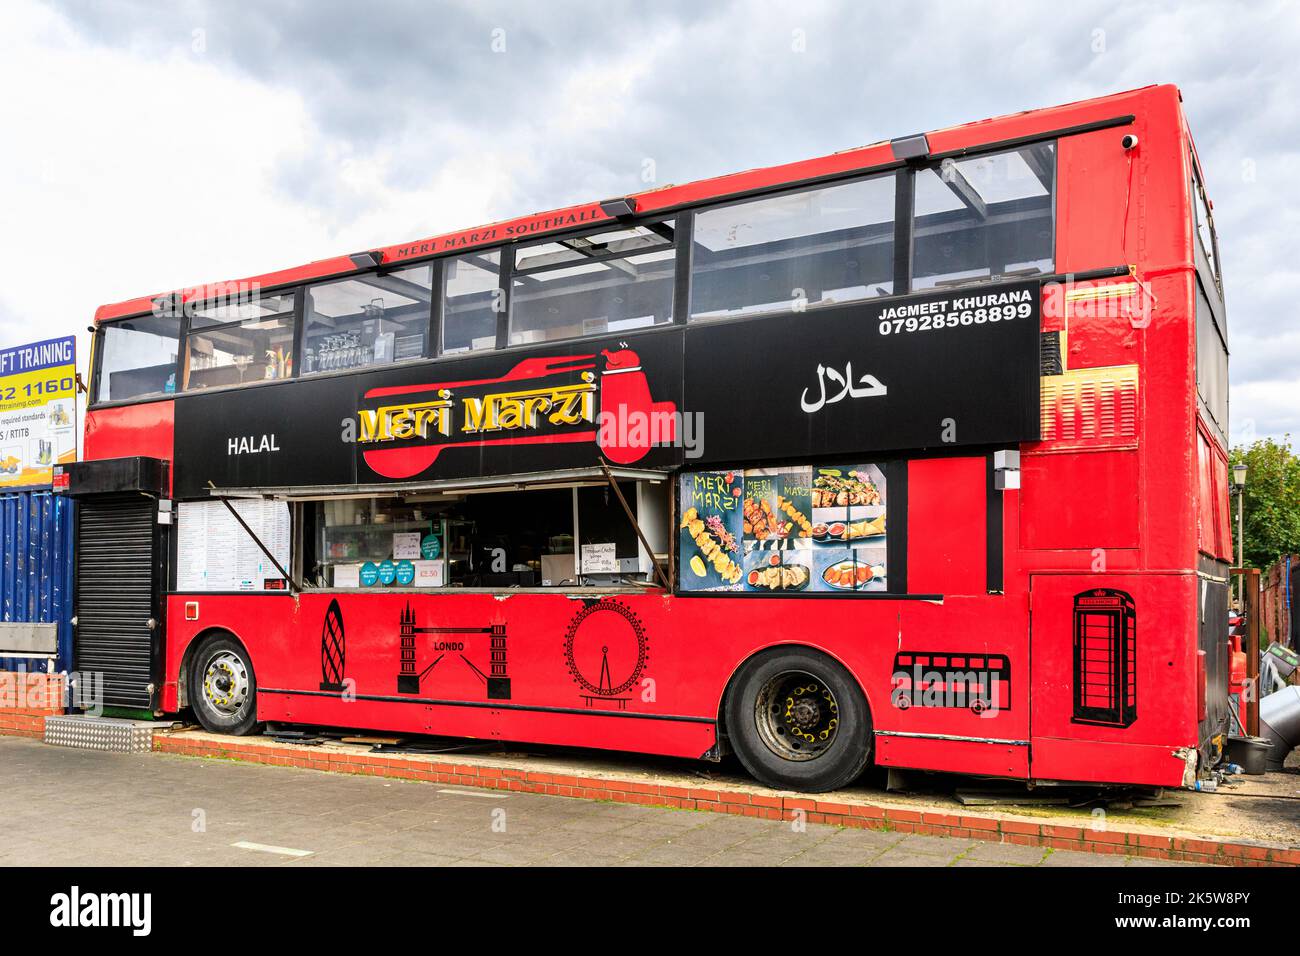 Meri Marzi takeaway and halal kebab fast food from a converted double decker bus, Southall, London Stock Photo